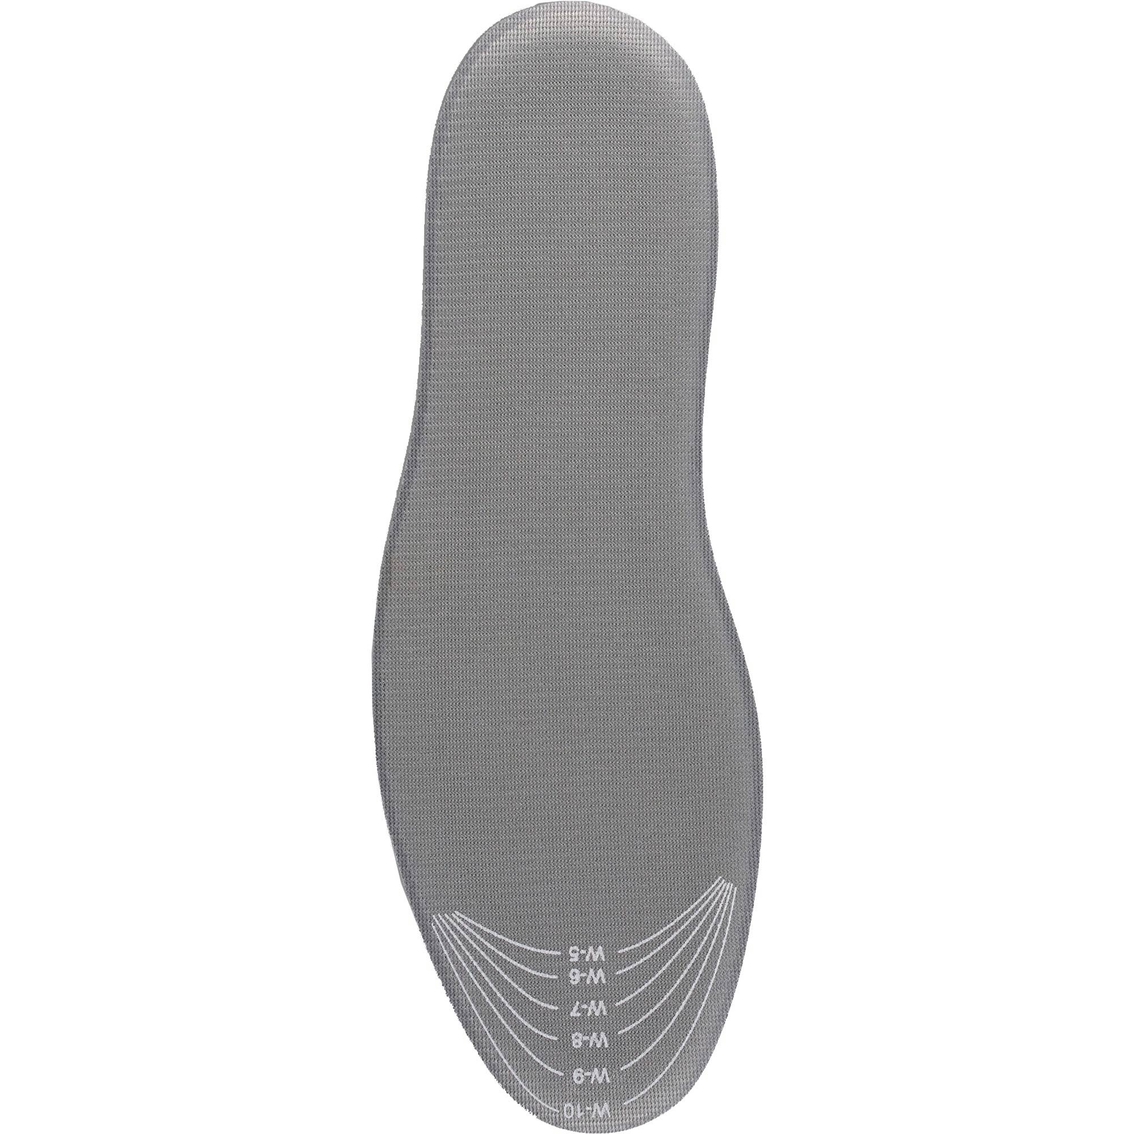 Airplus Women's Memory Comfort Shoe Insoles for Pressure Relief, Size 7 to 13 - Image 2 of 7